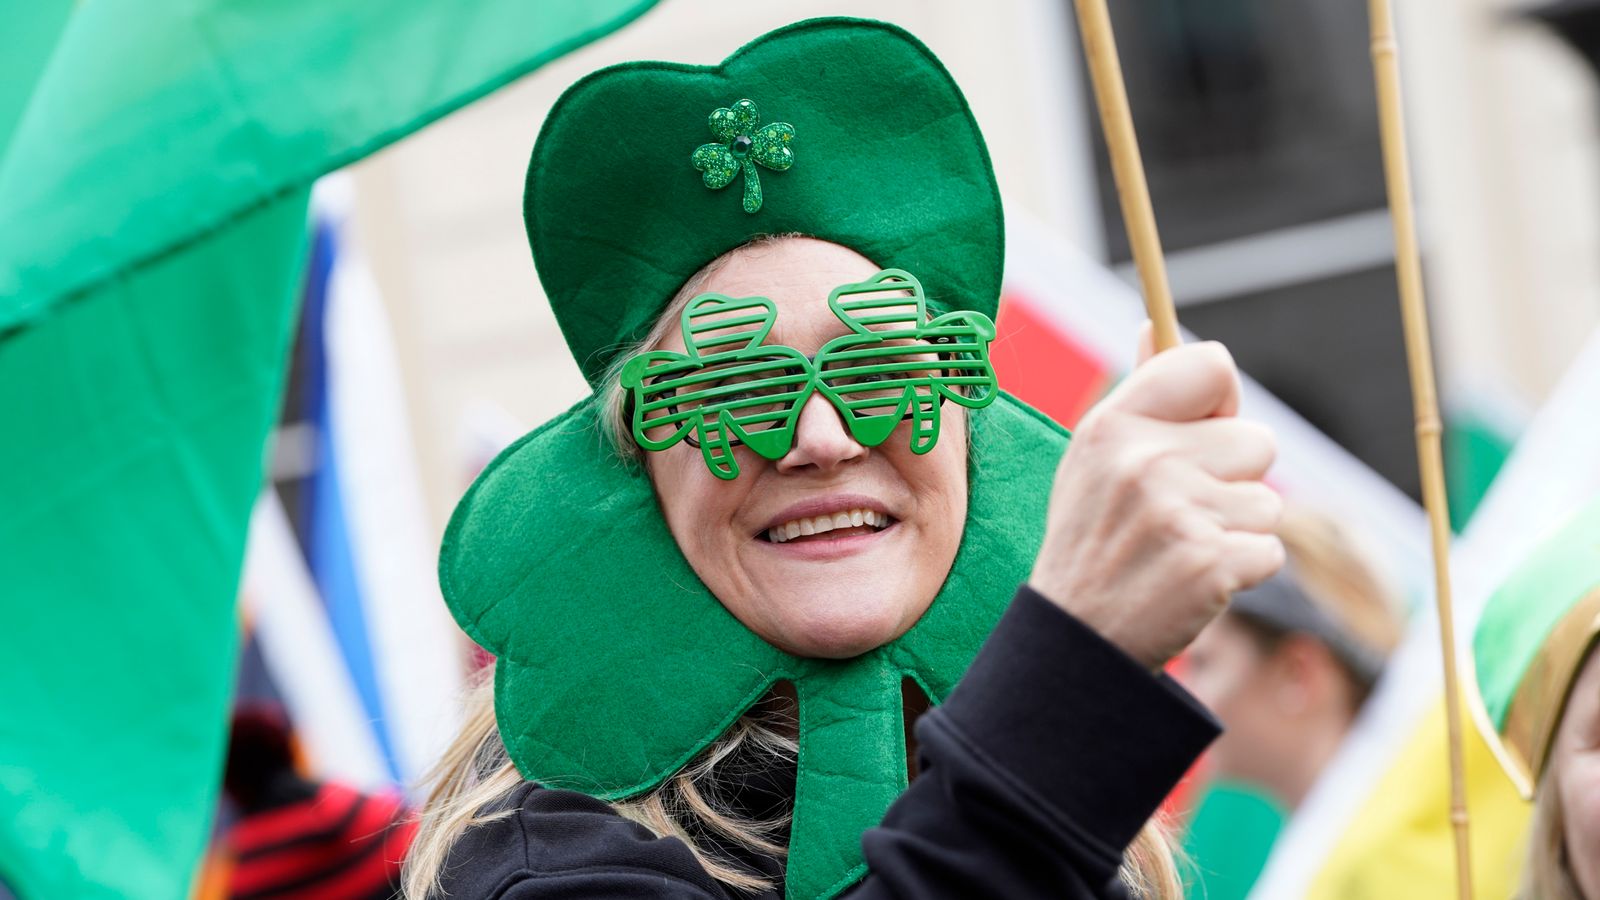 St Patrick's Day celebrated with parades, shamrocks and three cheers